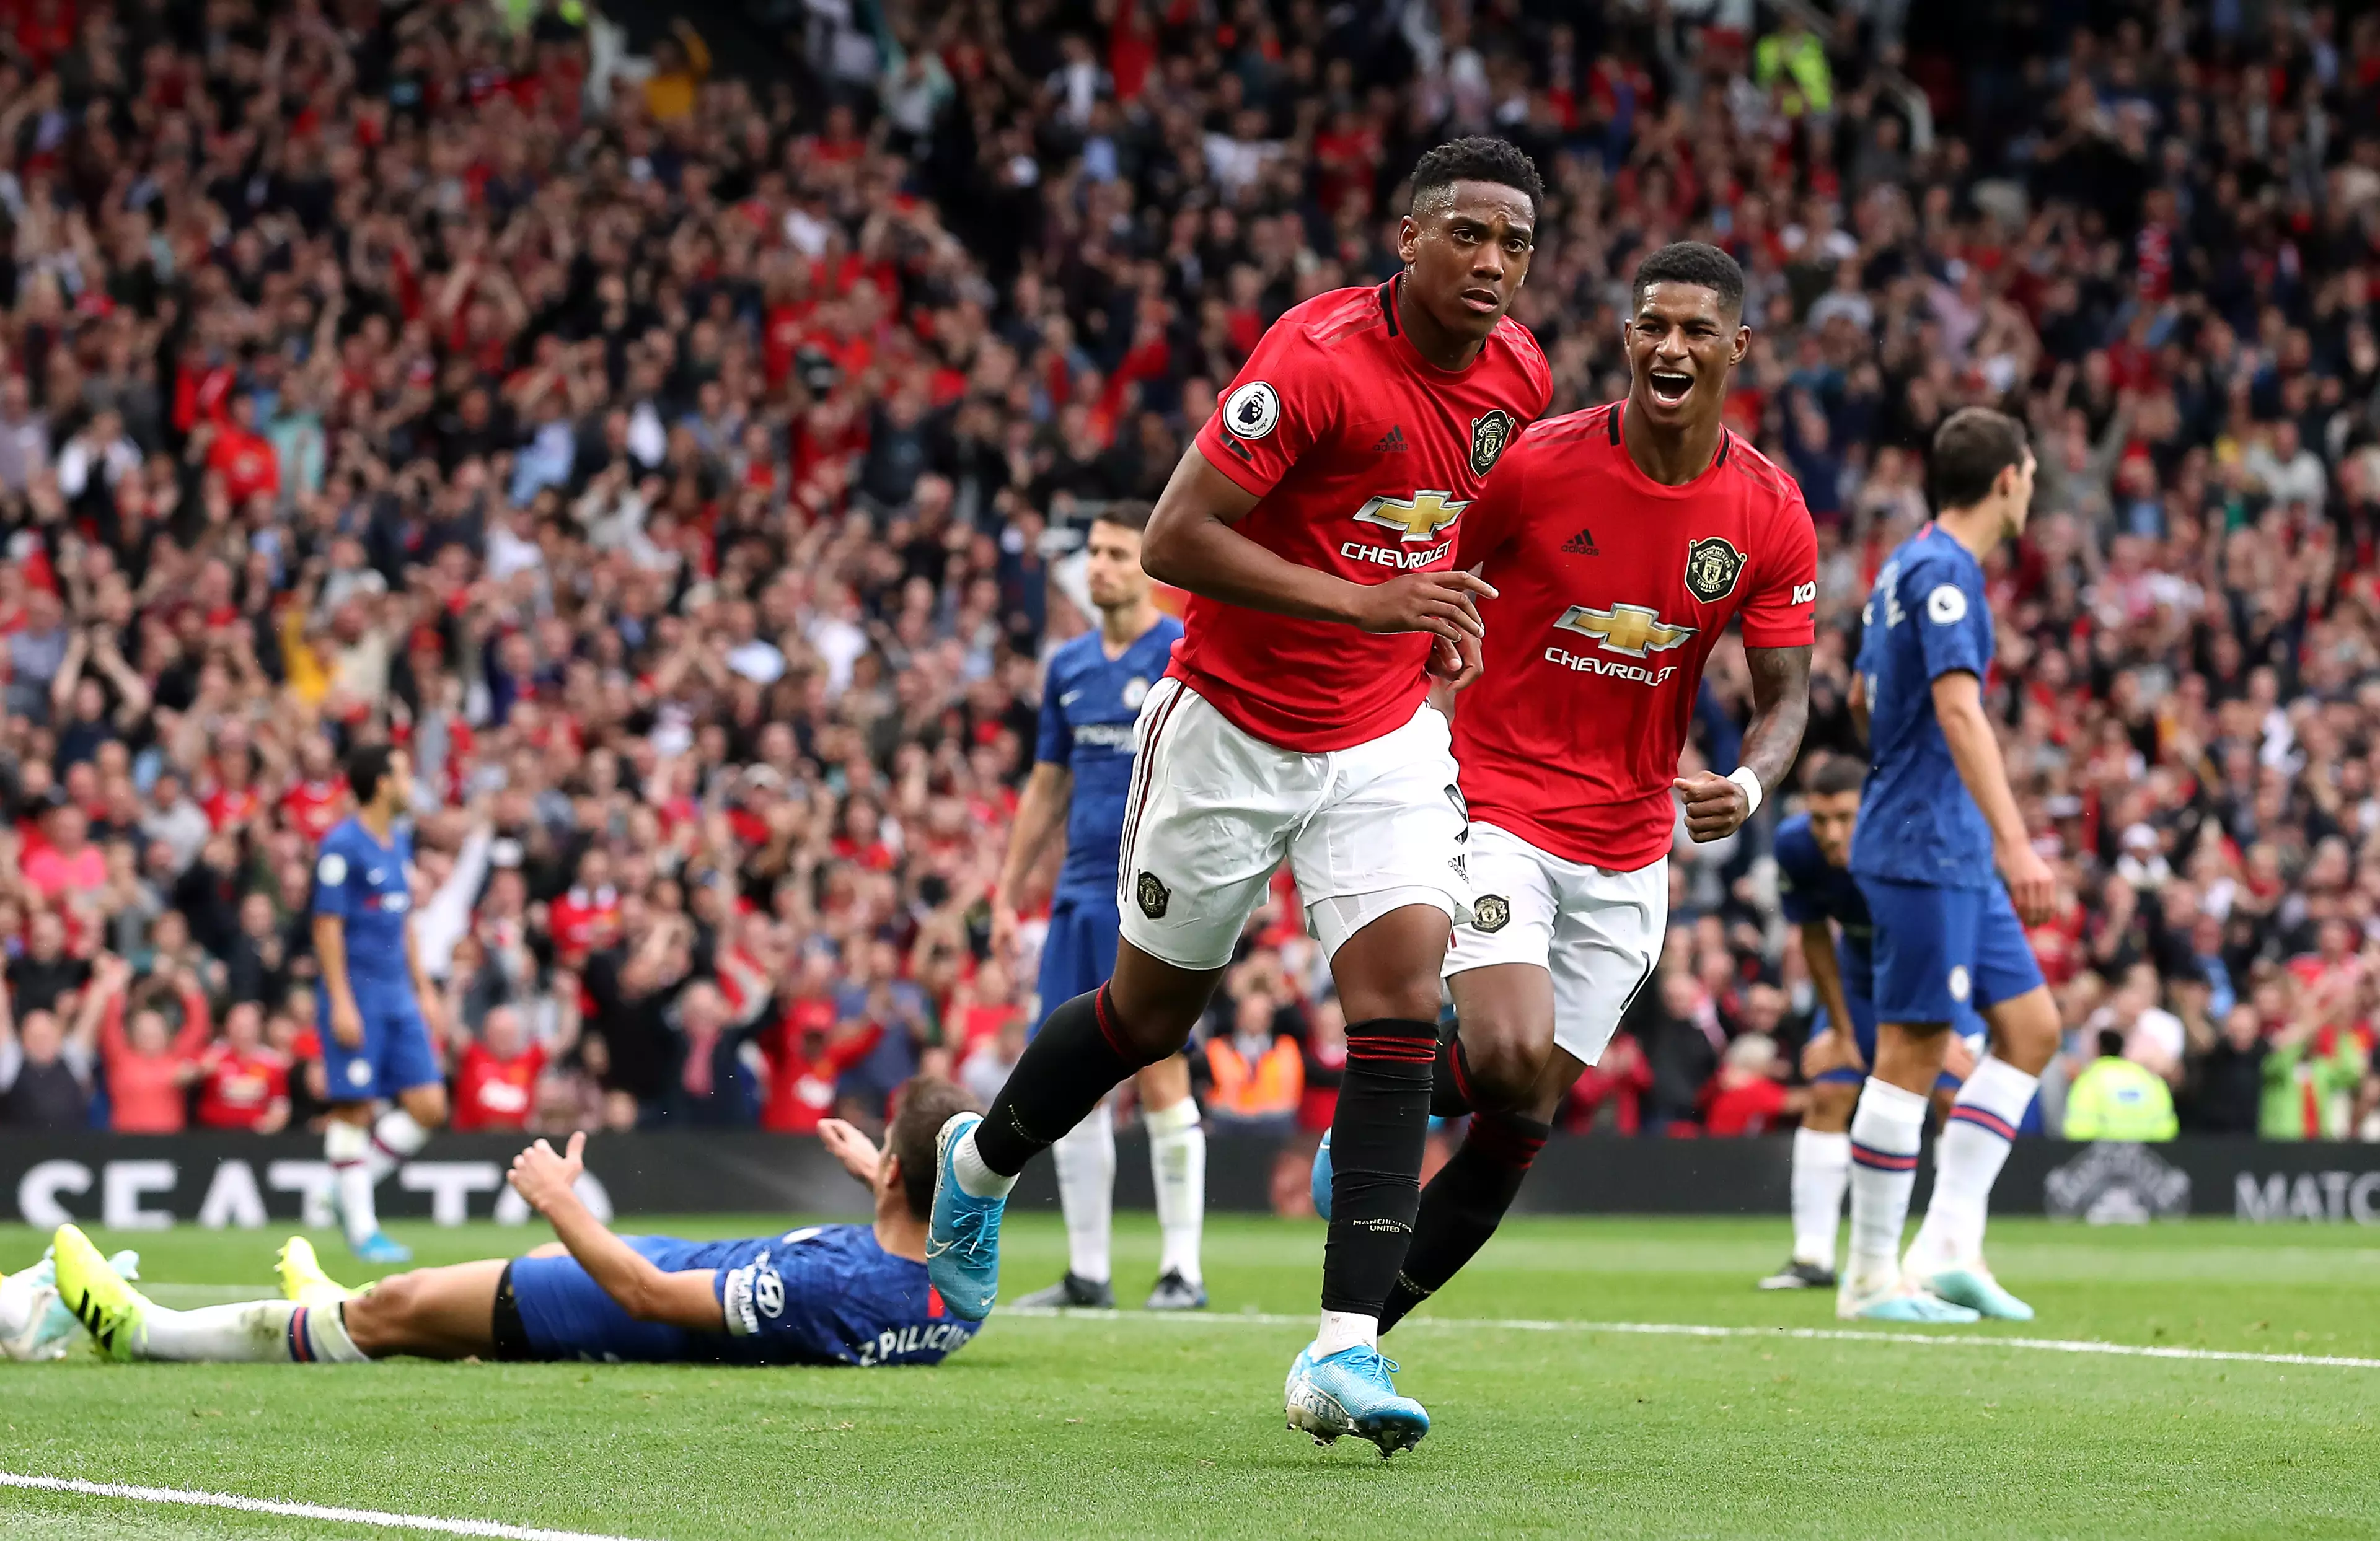 Anthony Martial and Marcus Rashford have been compared to some rival Premier League players